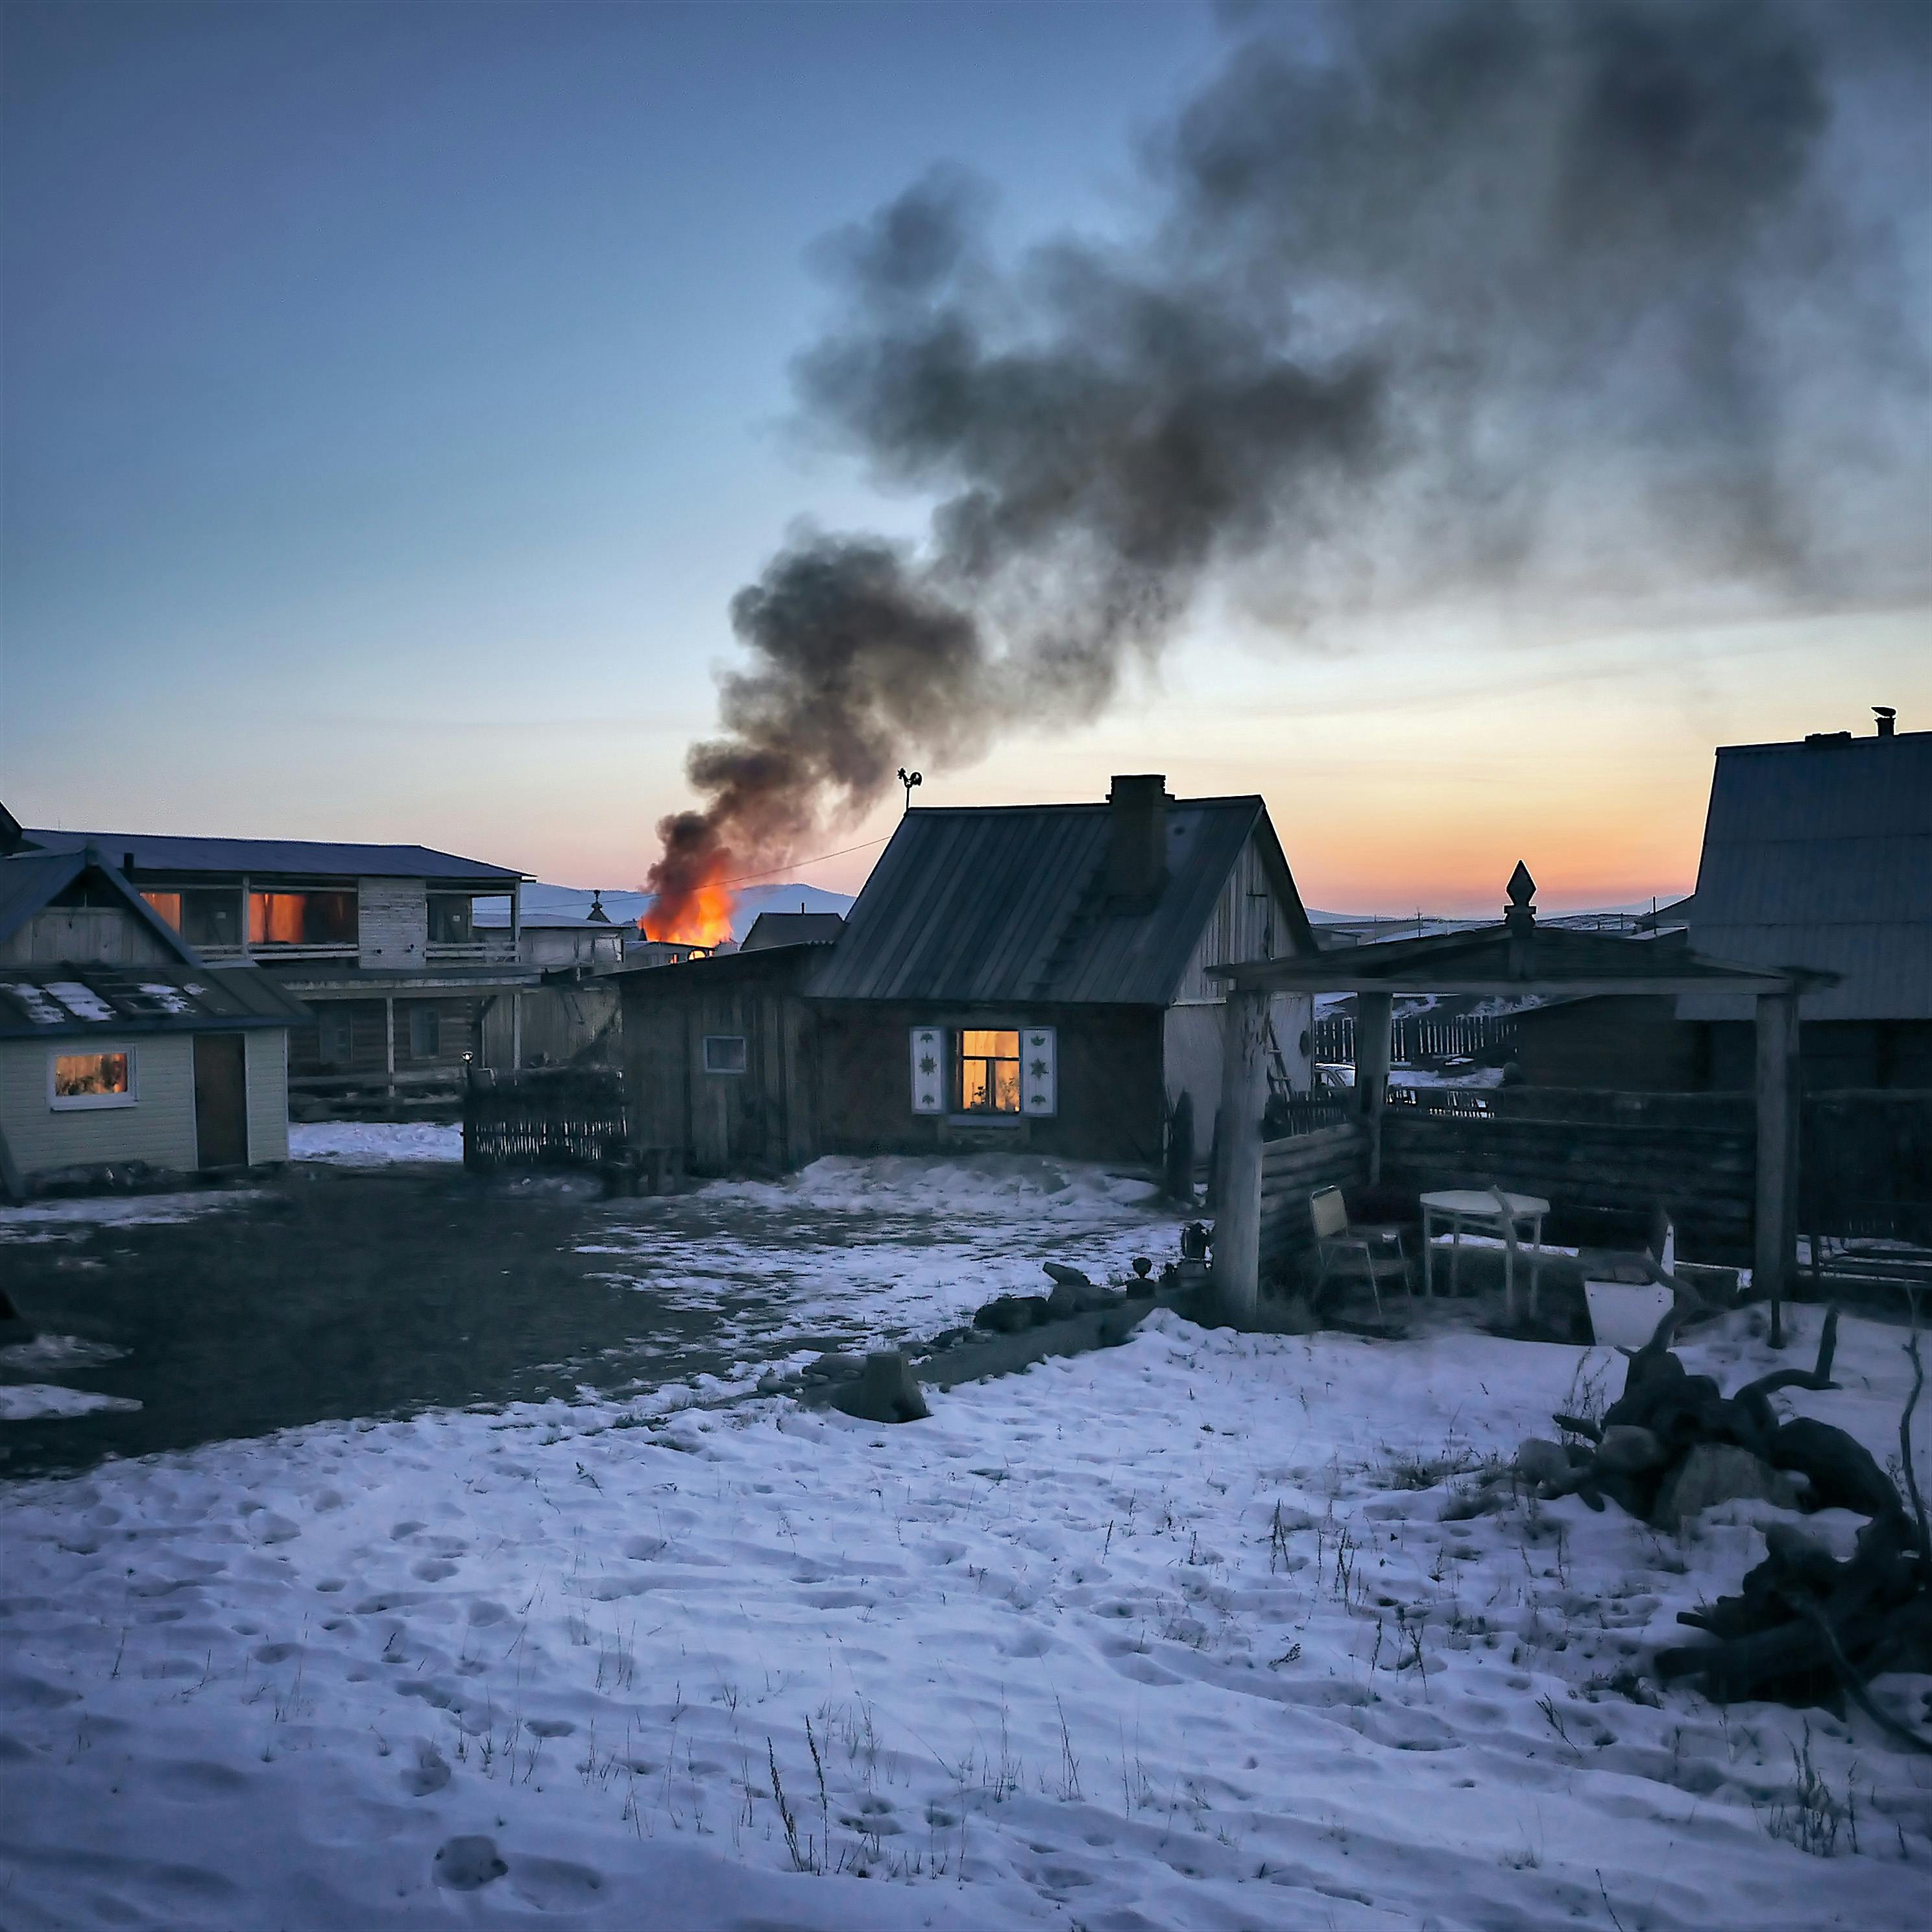 An old wooden house is burning. | Photo: Pexels